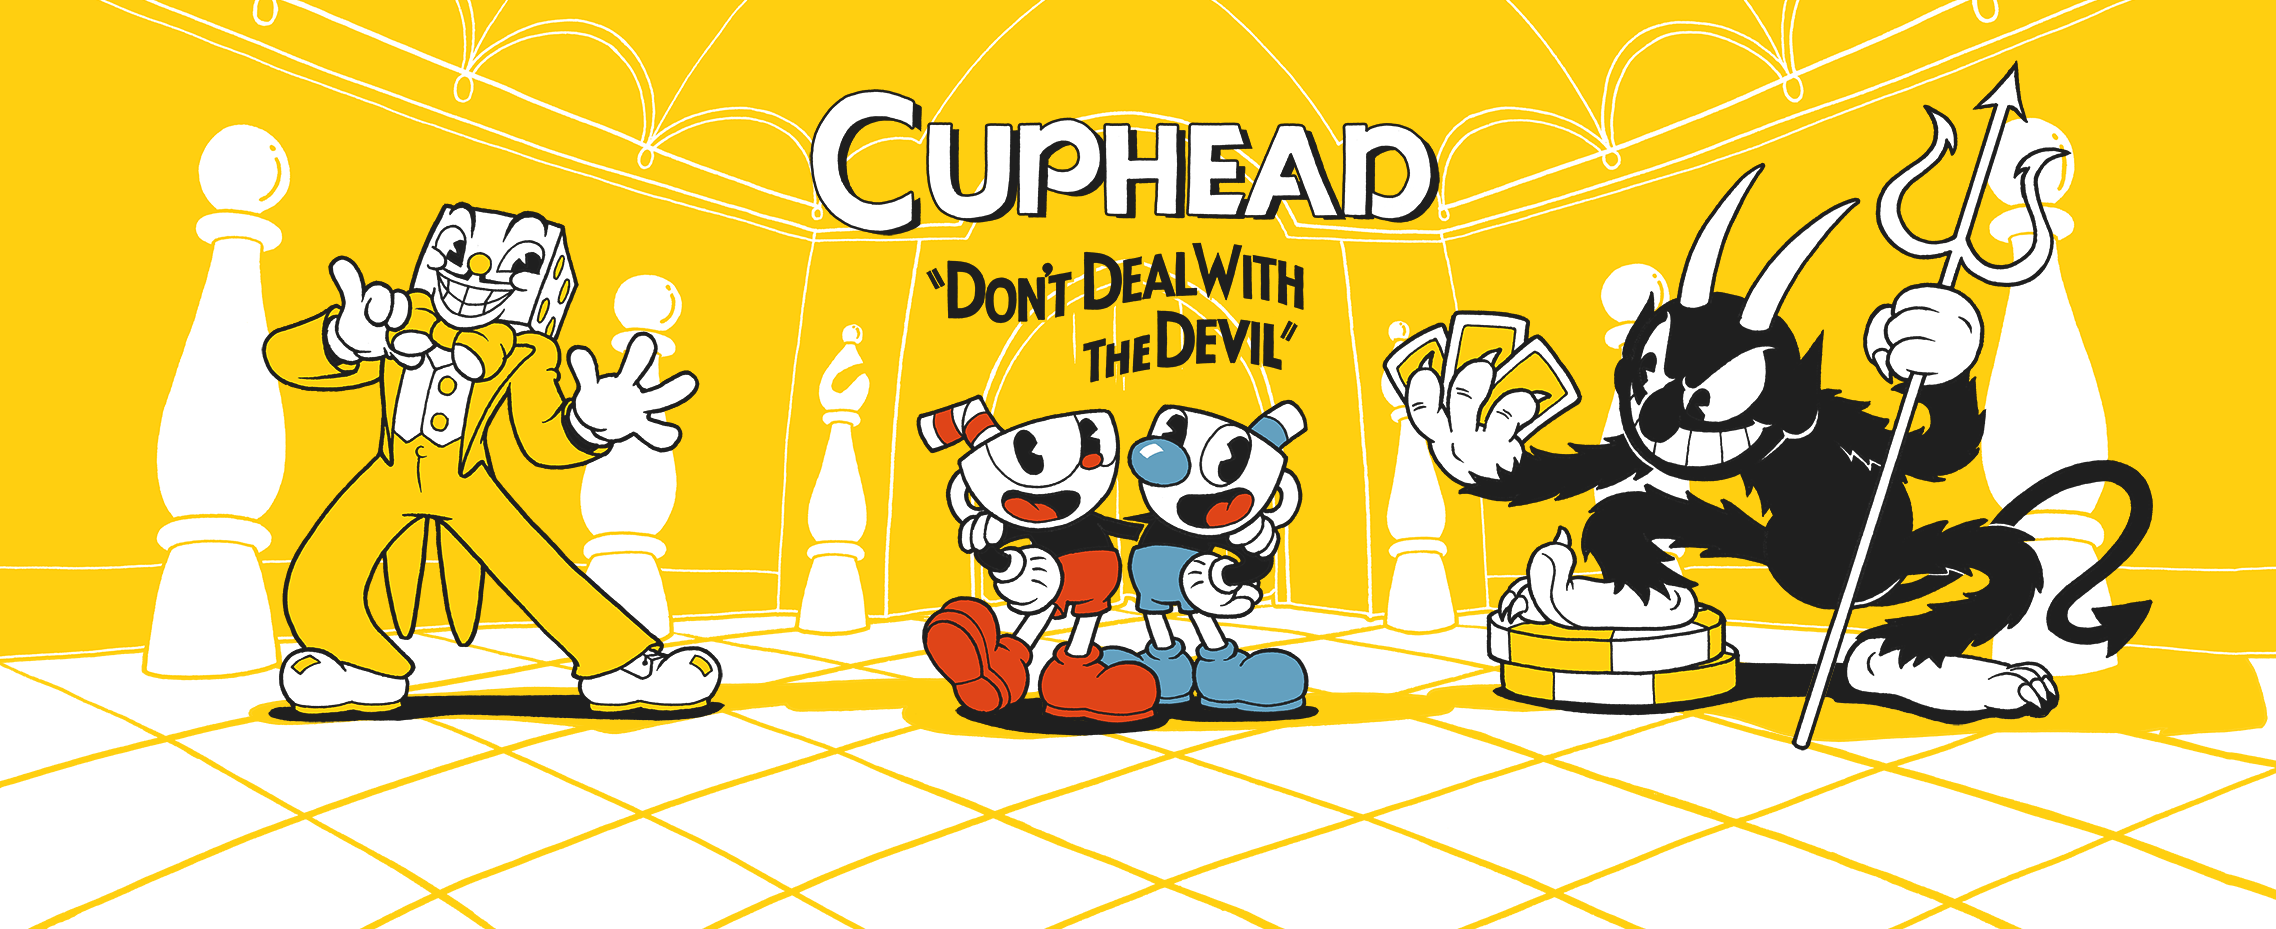 cuphead_promo_casino_no_text.png